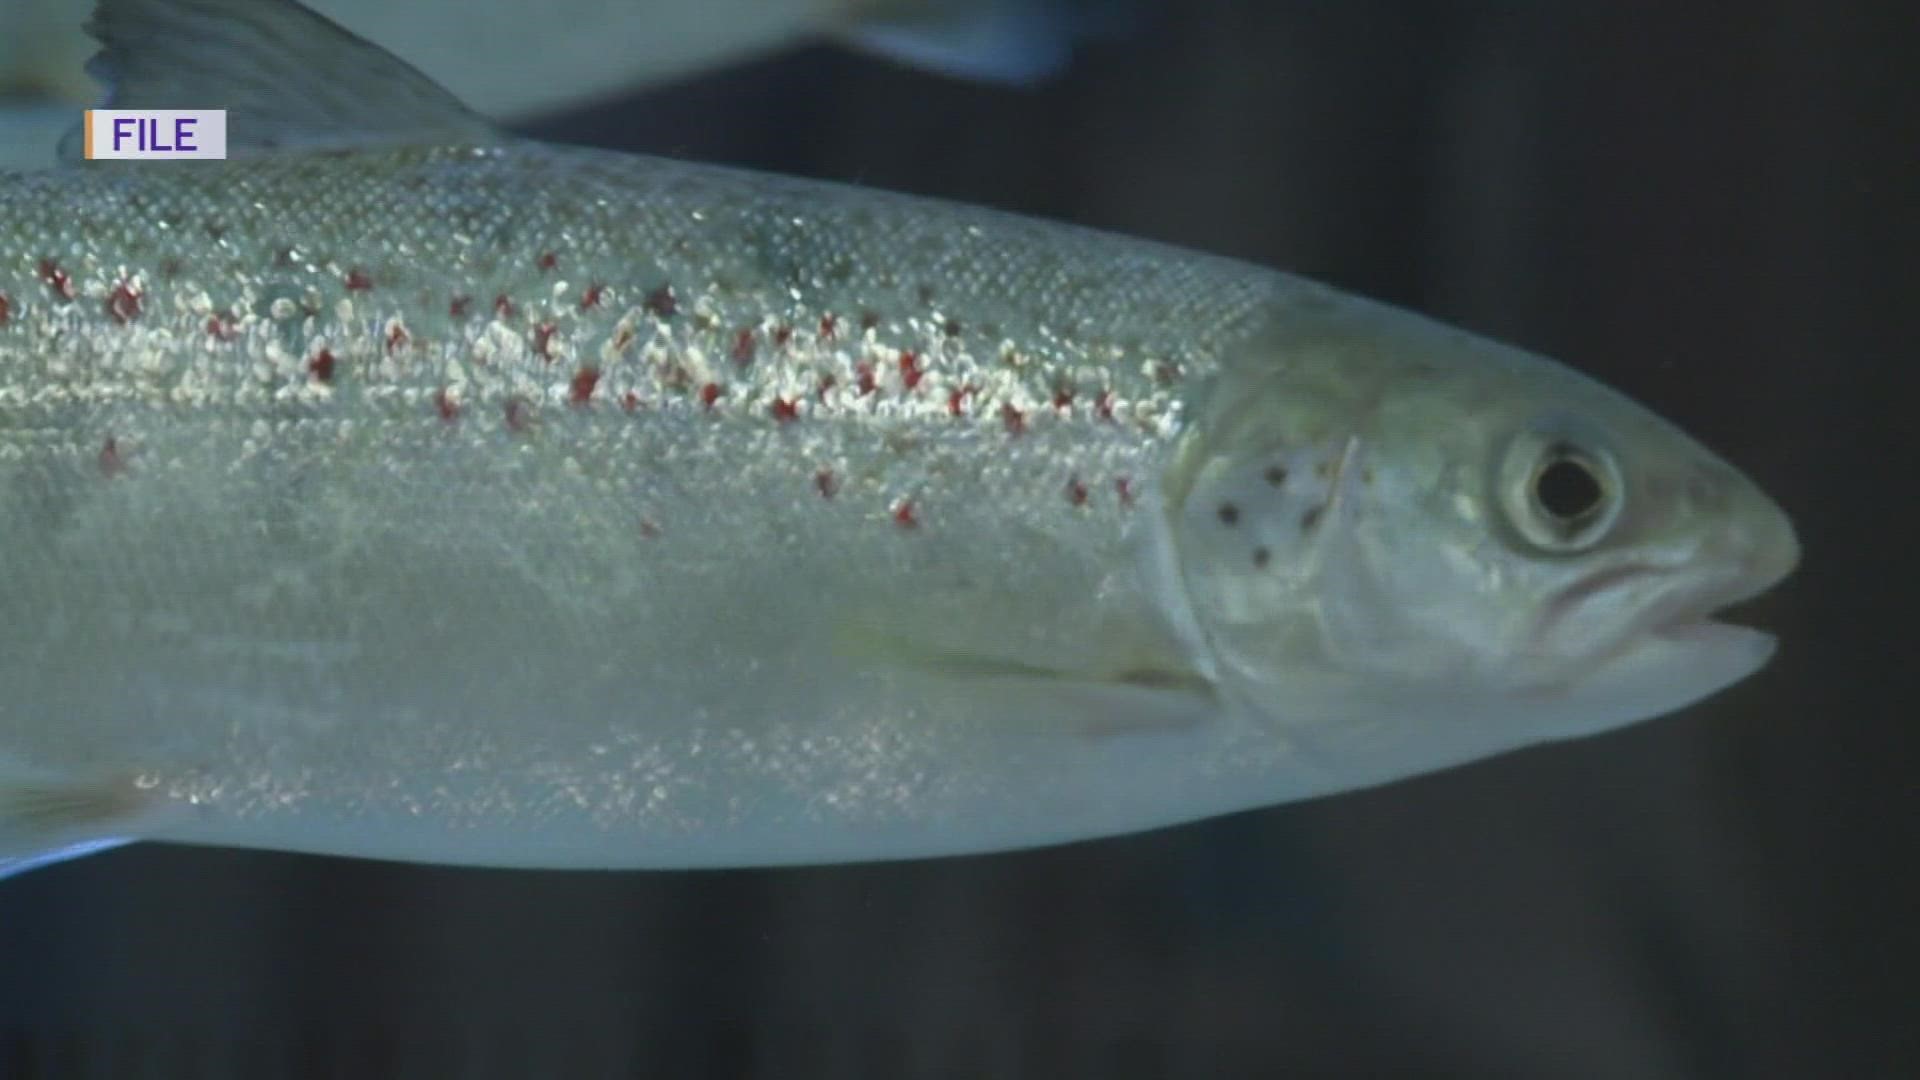 The Maine Dept. of Marine Resources says American Aquafarms has proposed getting young salmon from a source in Newfoundland that hasn't been approved in the U.S.